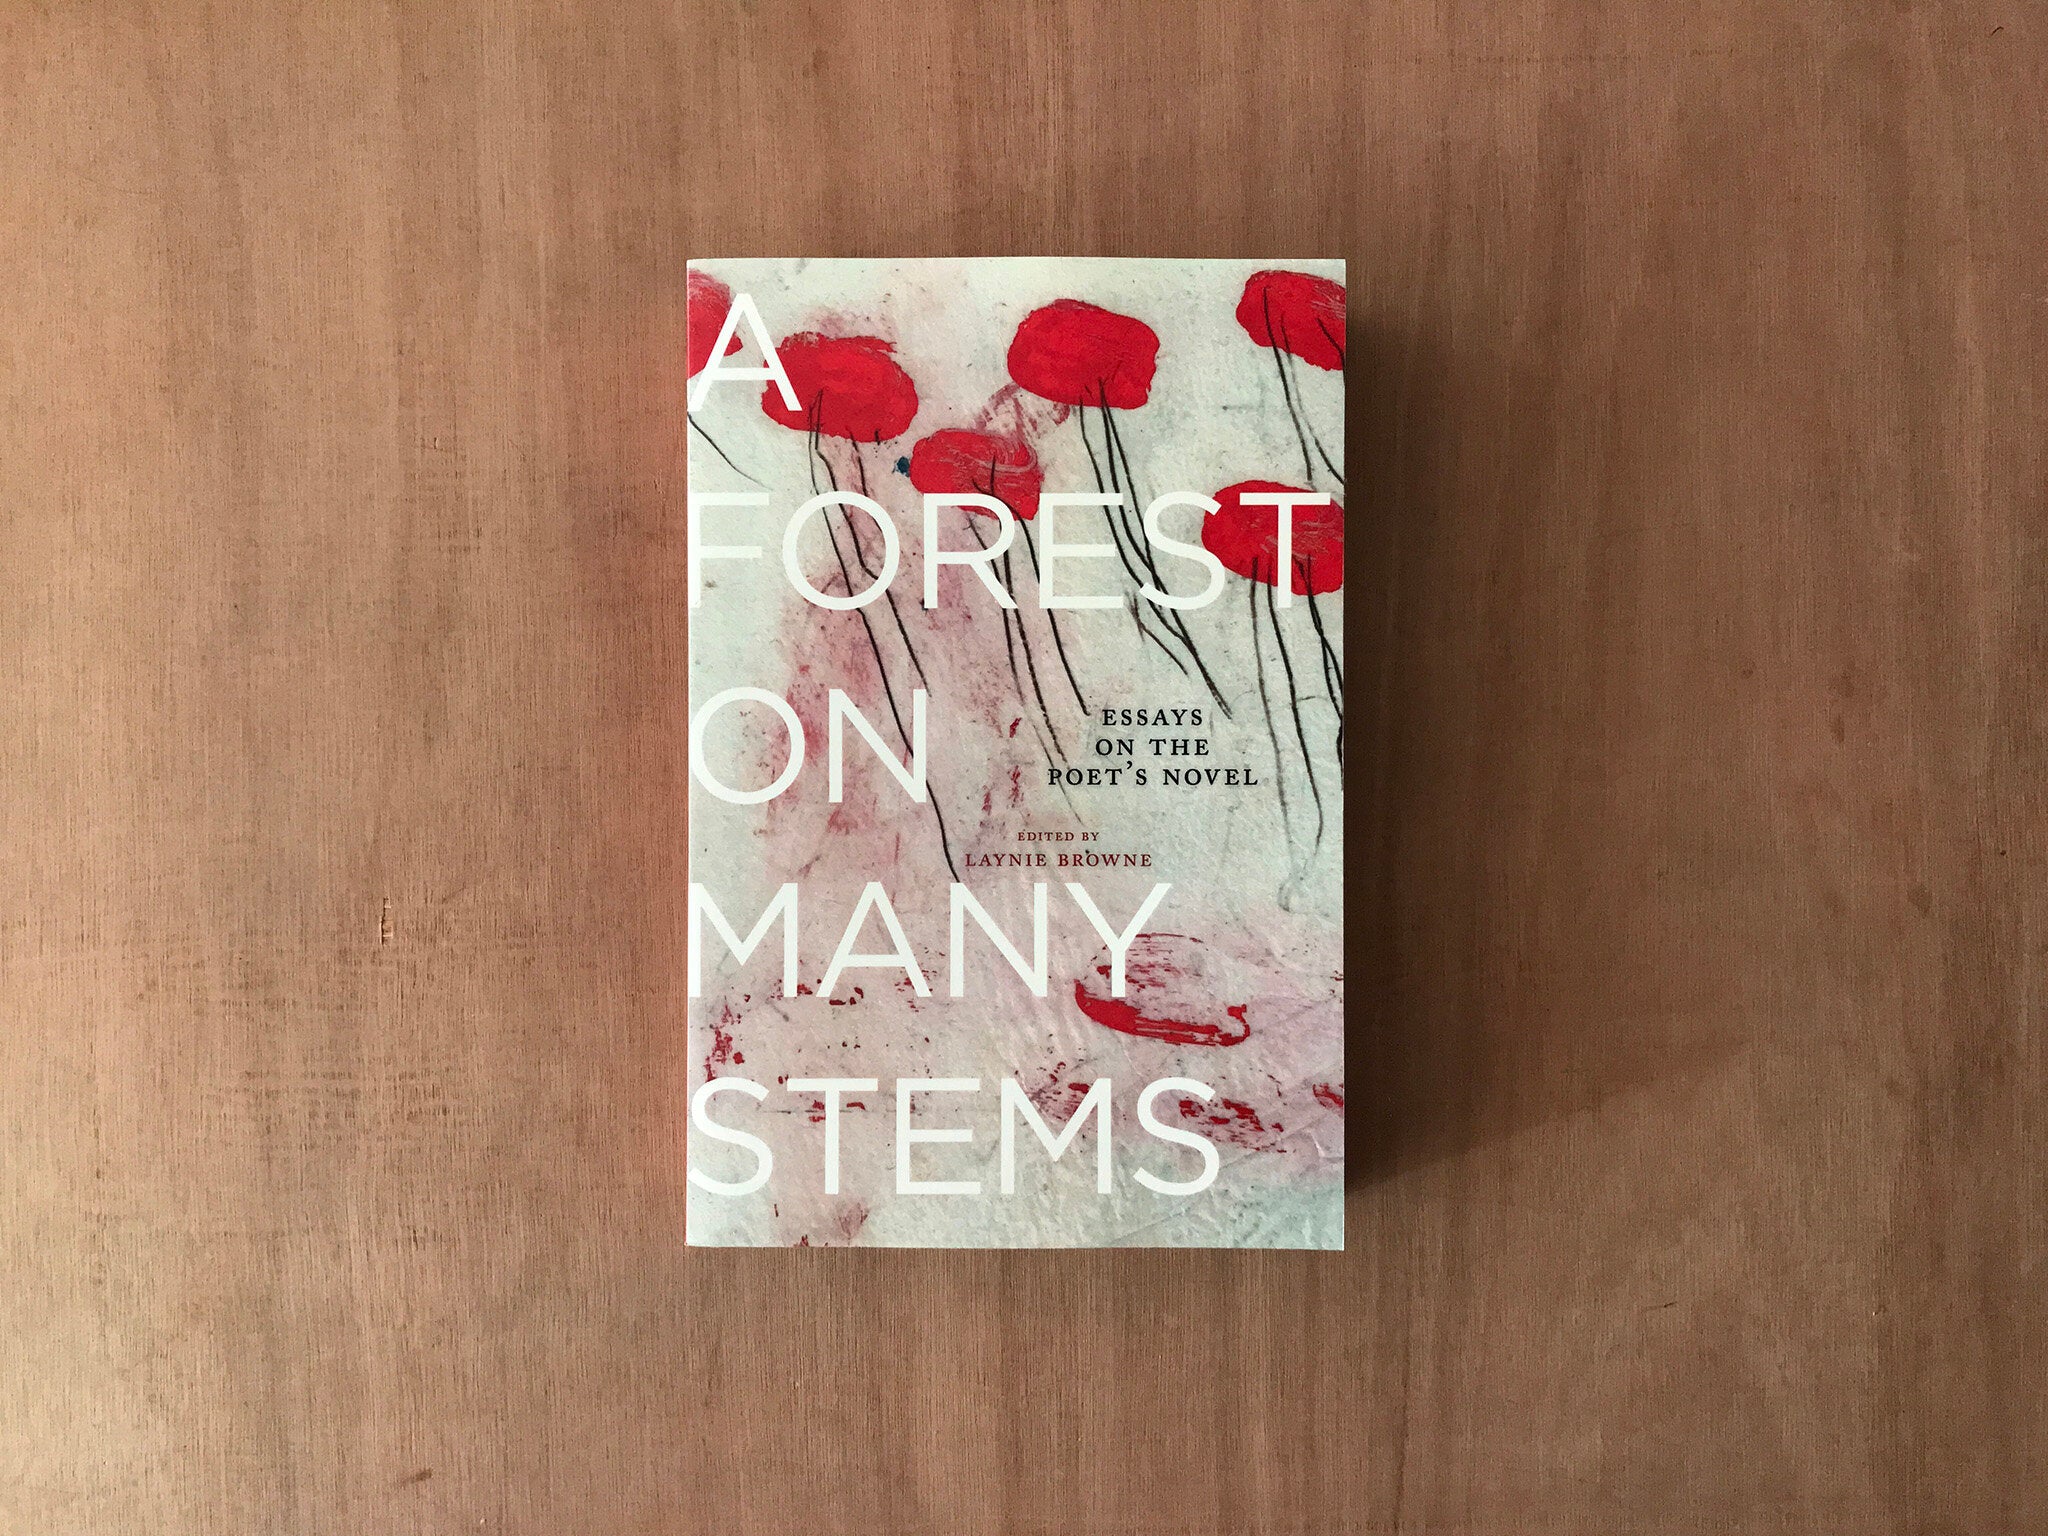 A FOREST ON MANY STEMS Edited by Laynie Browne